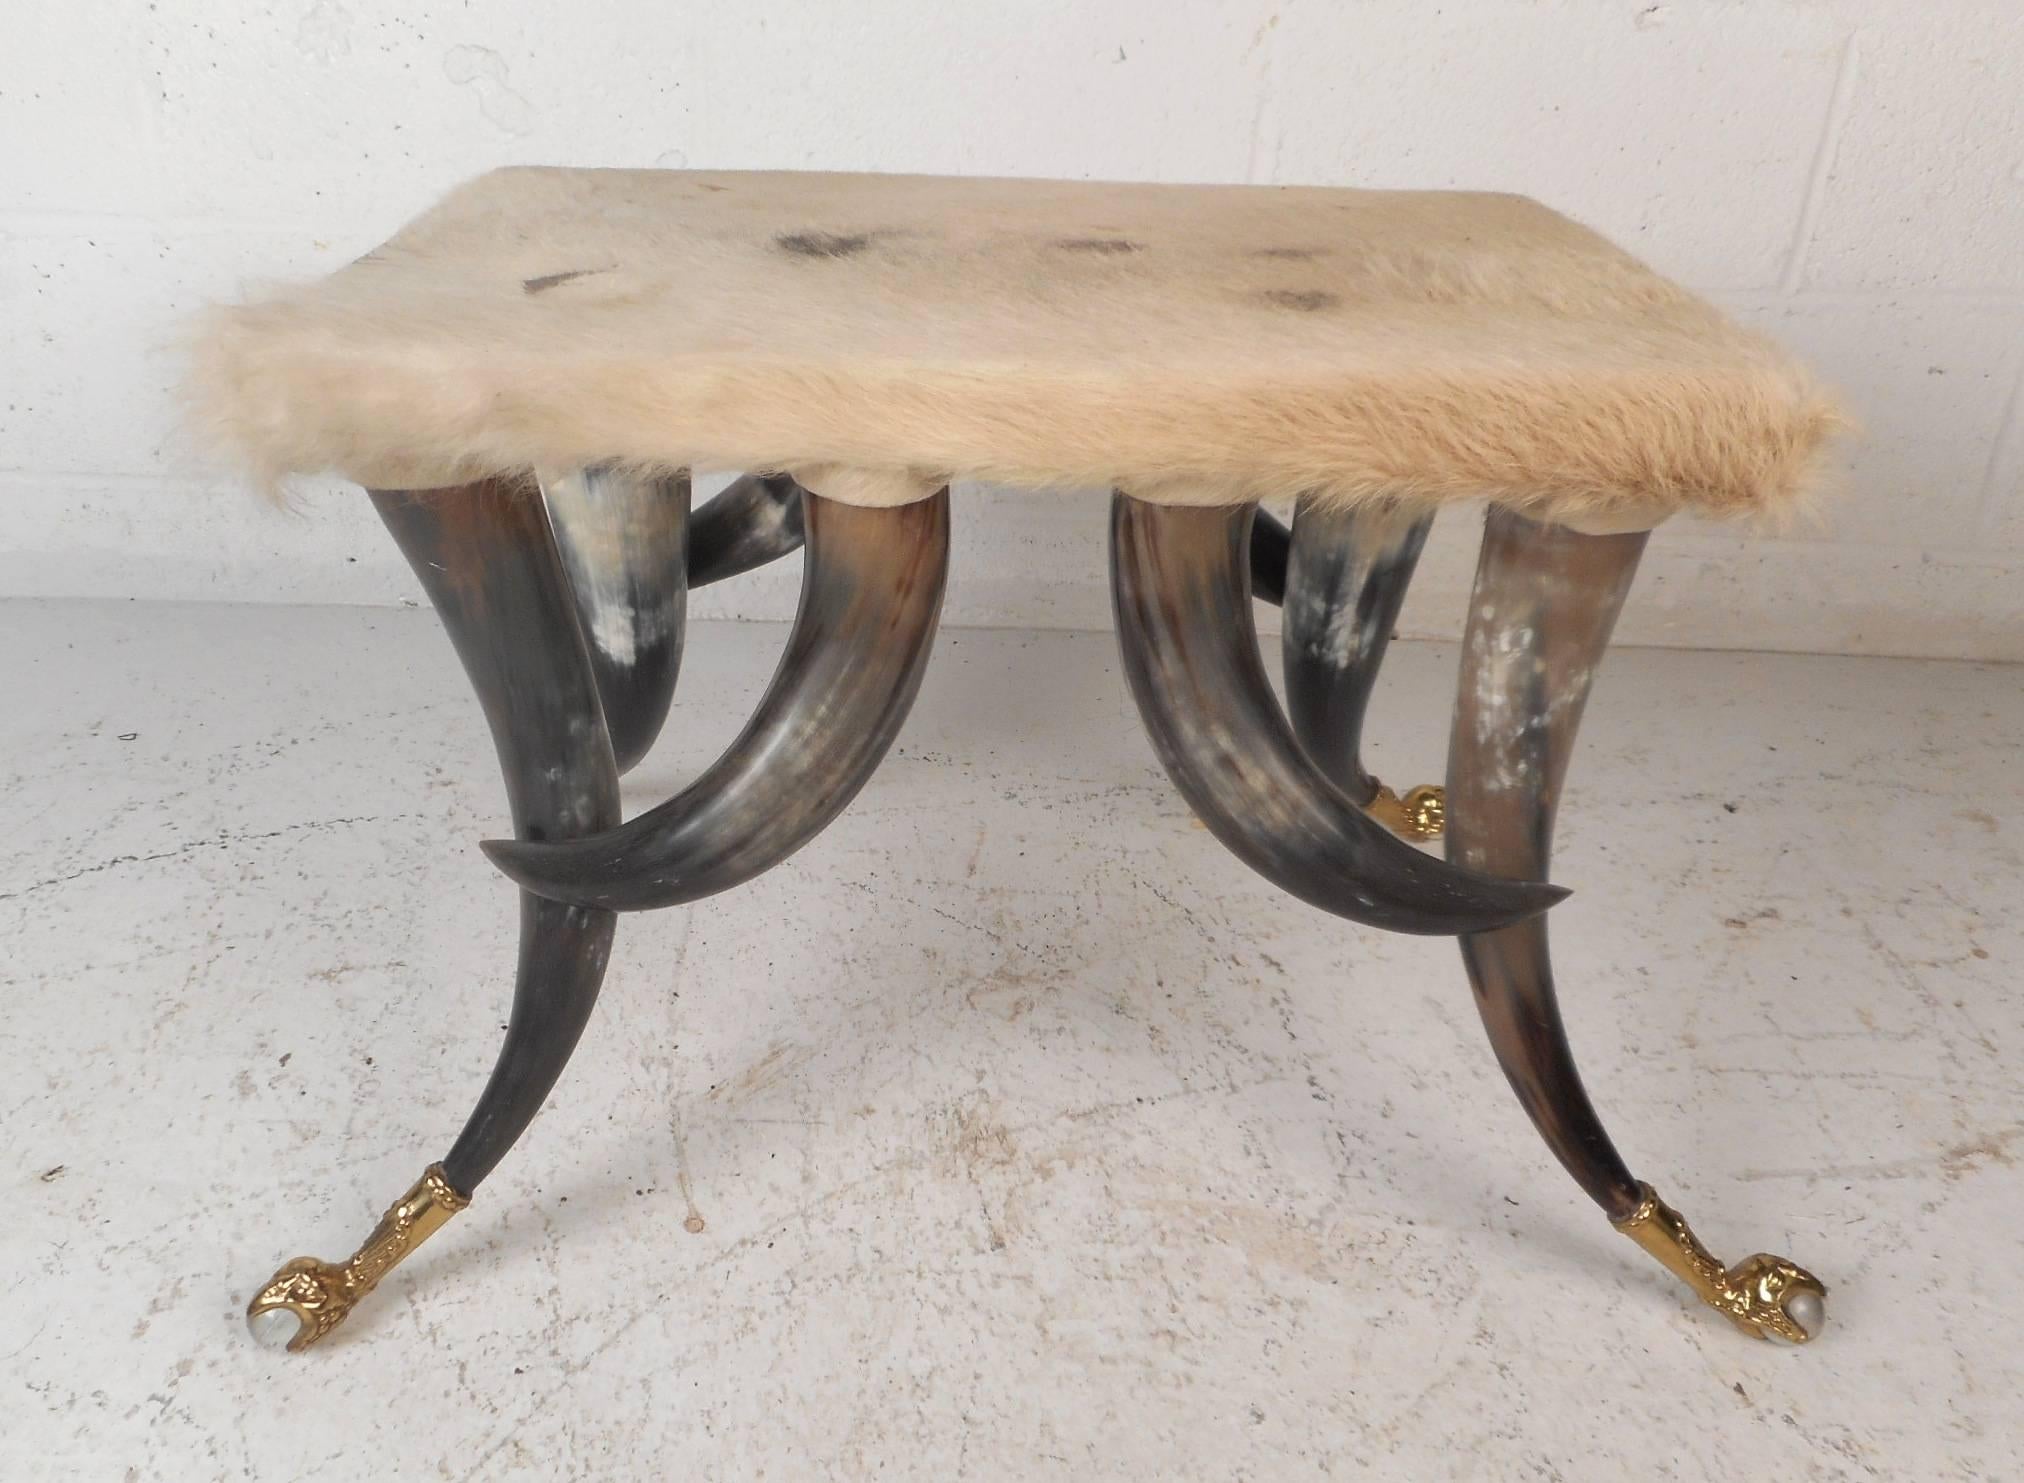 This beautiful Mid-Century Modern ottoman features a soft cowhide top with a unique horn base for legs. Sleek design with brass claw feet holding a clear ball. Exquisite detail and sturdy construction makes this vintage modern stool the perfect